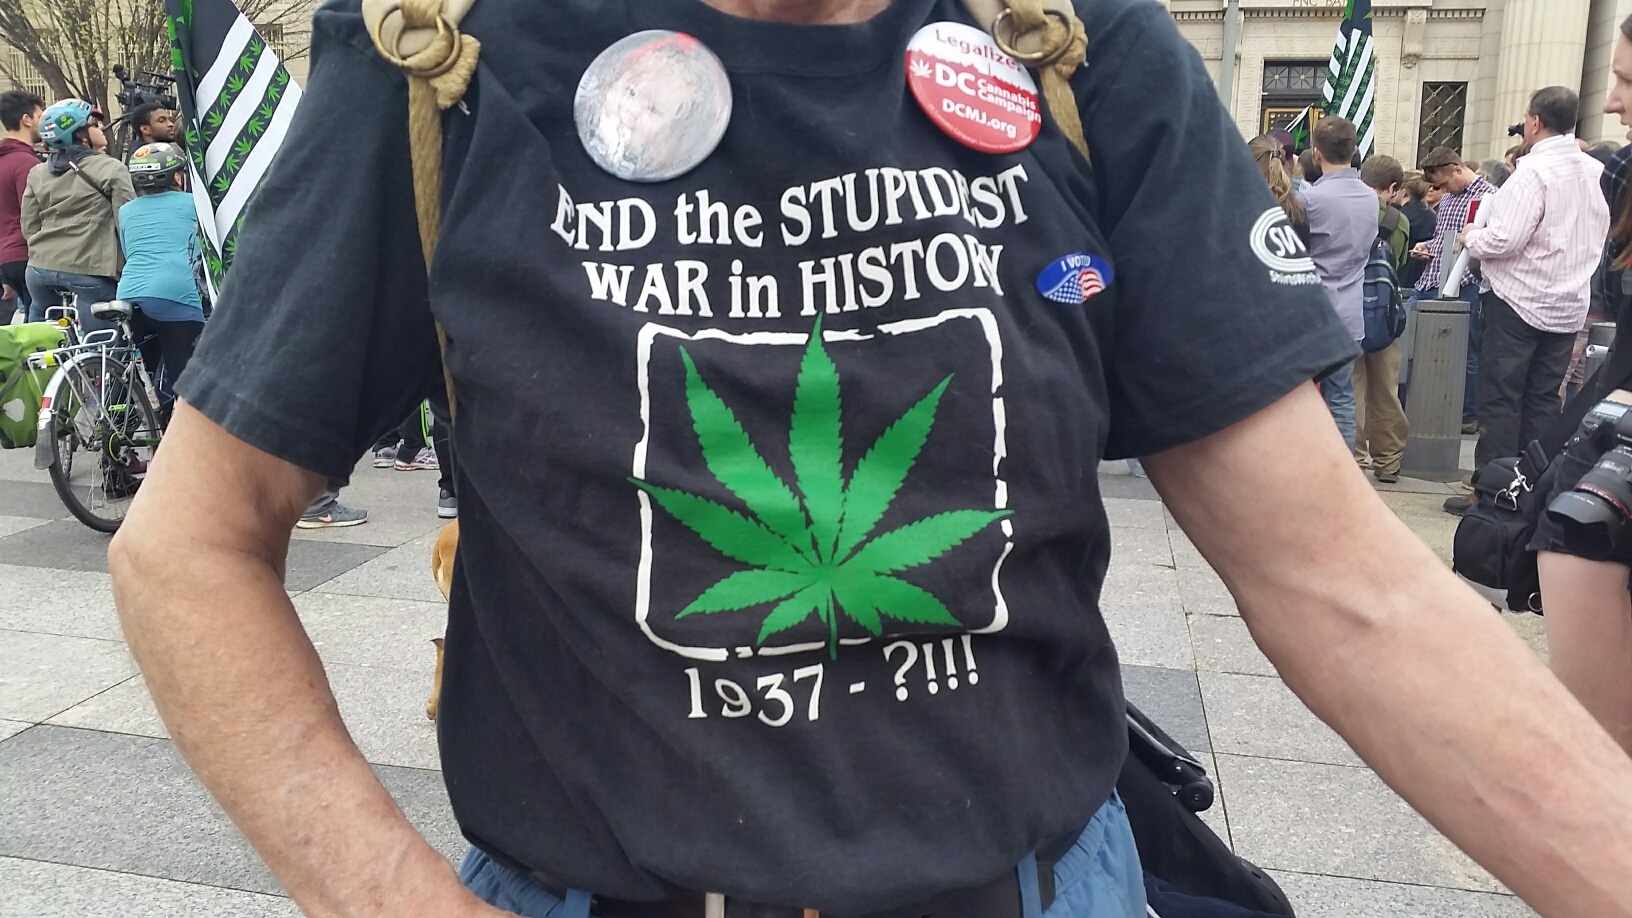 This is the scene from a protest outside the White House on Saturday, March 2, 2016. Pro-marijuana activists say President Barack Obama should remove pot from the list of Schedule 1 controlled substances, which includes heroin and other addictive drugs. (WTOP/Kathy Stewart)